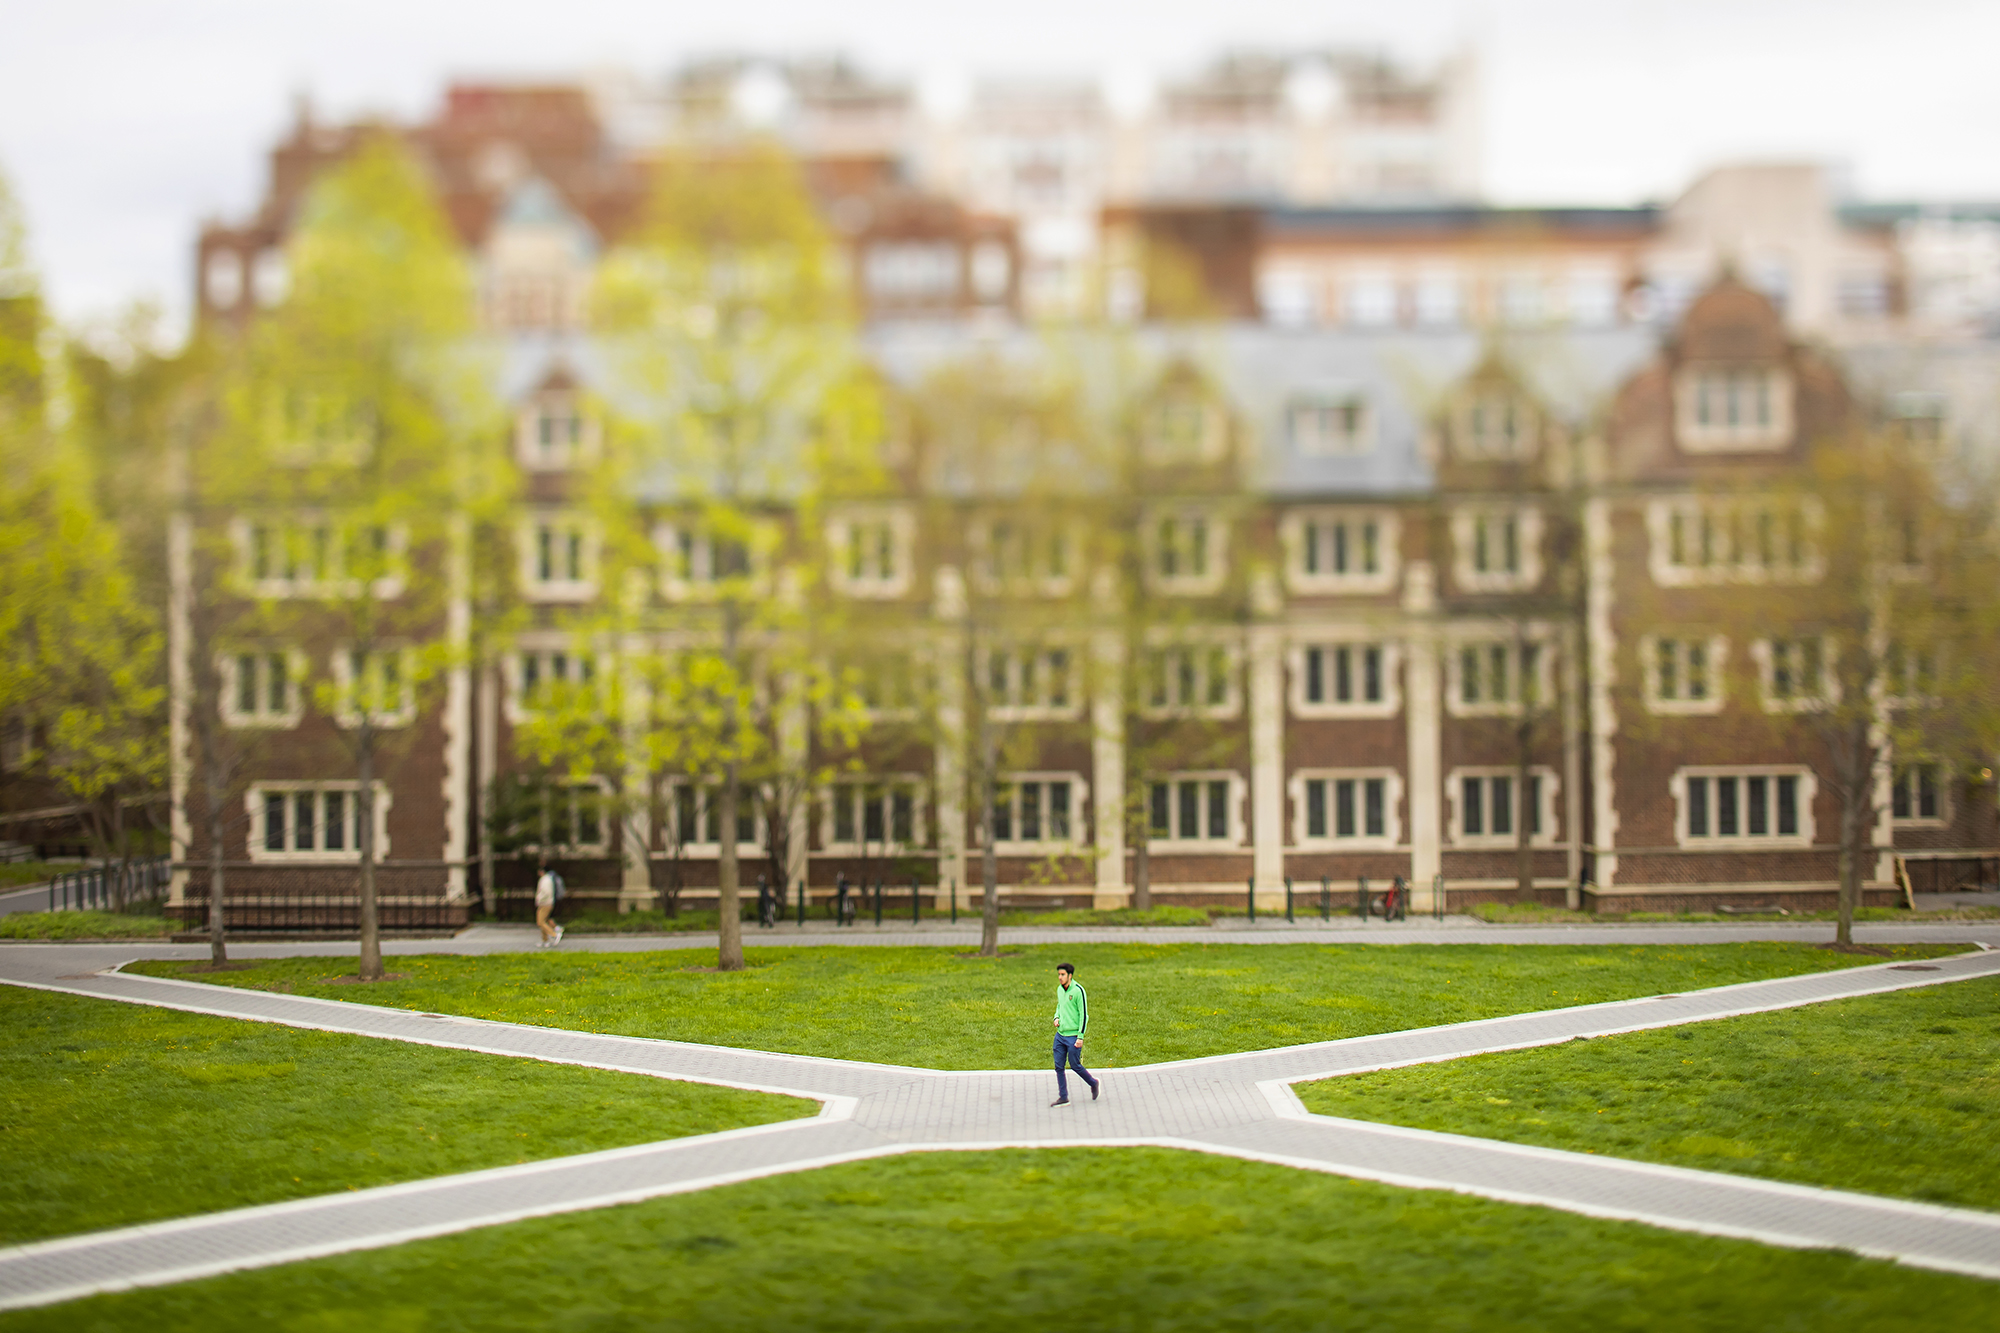 One person walking along the walkway at the Penn Quadrangle outside during the daytime